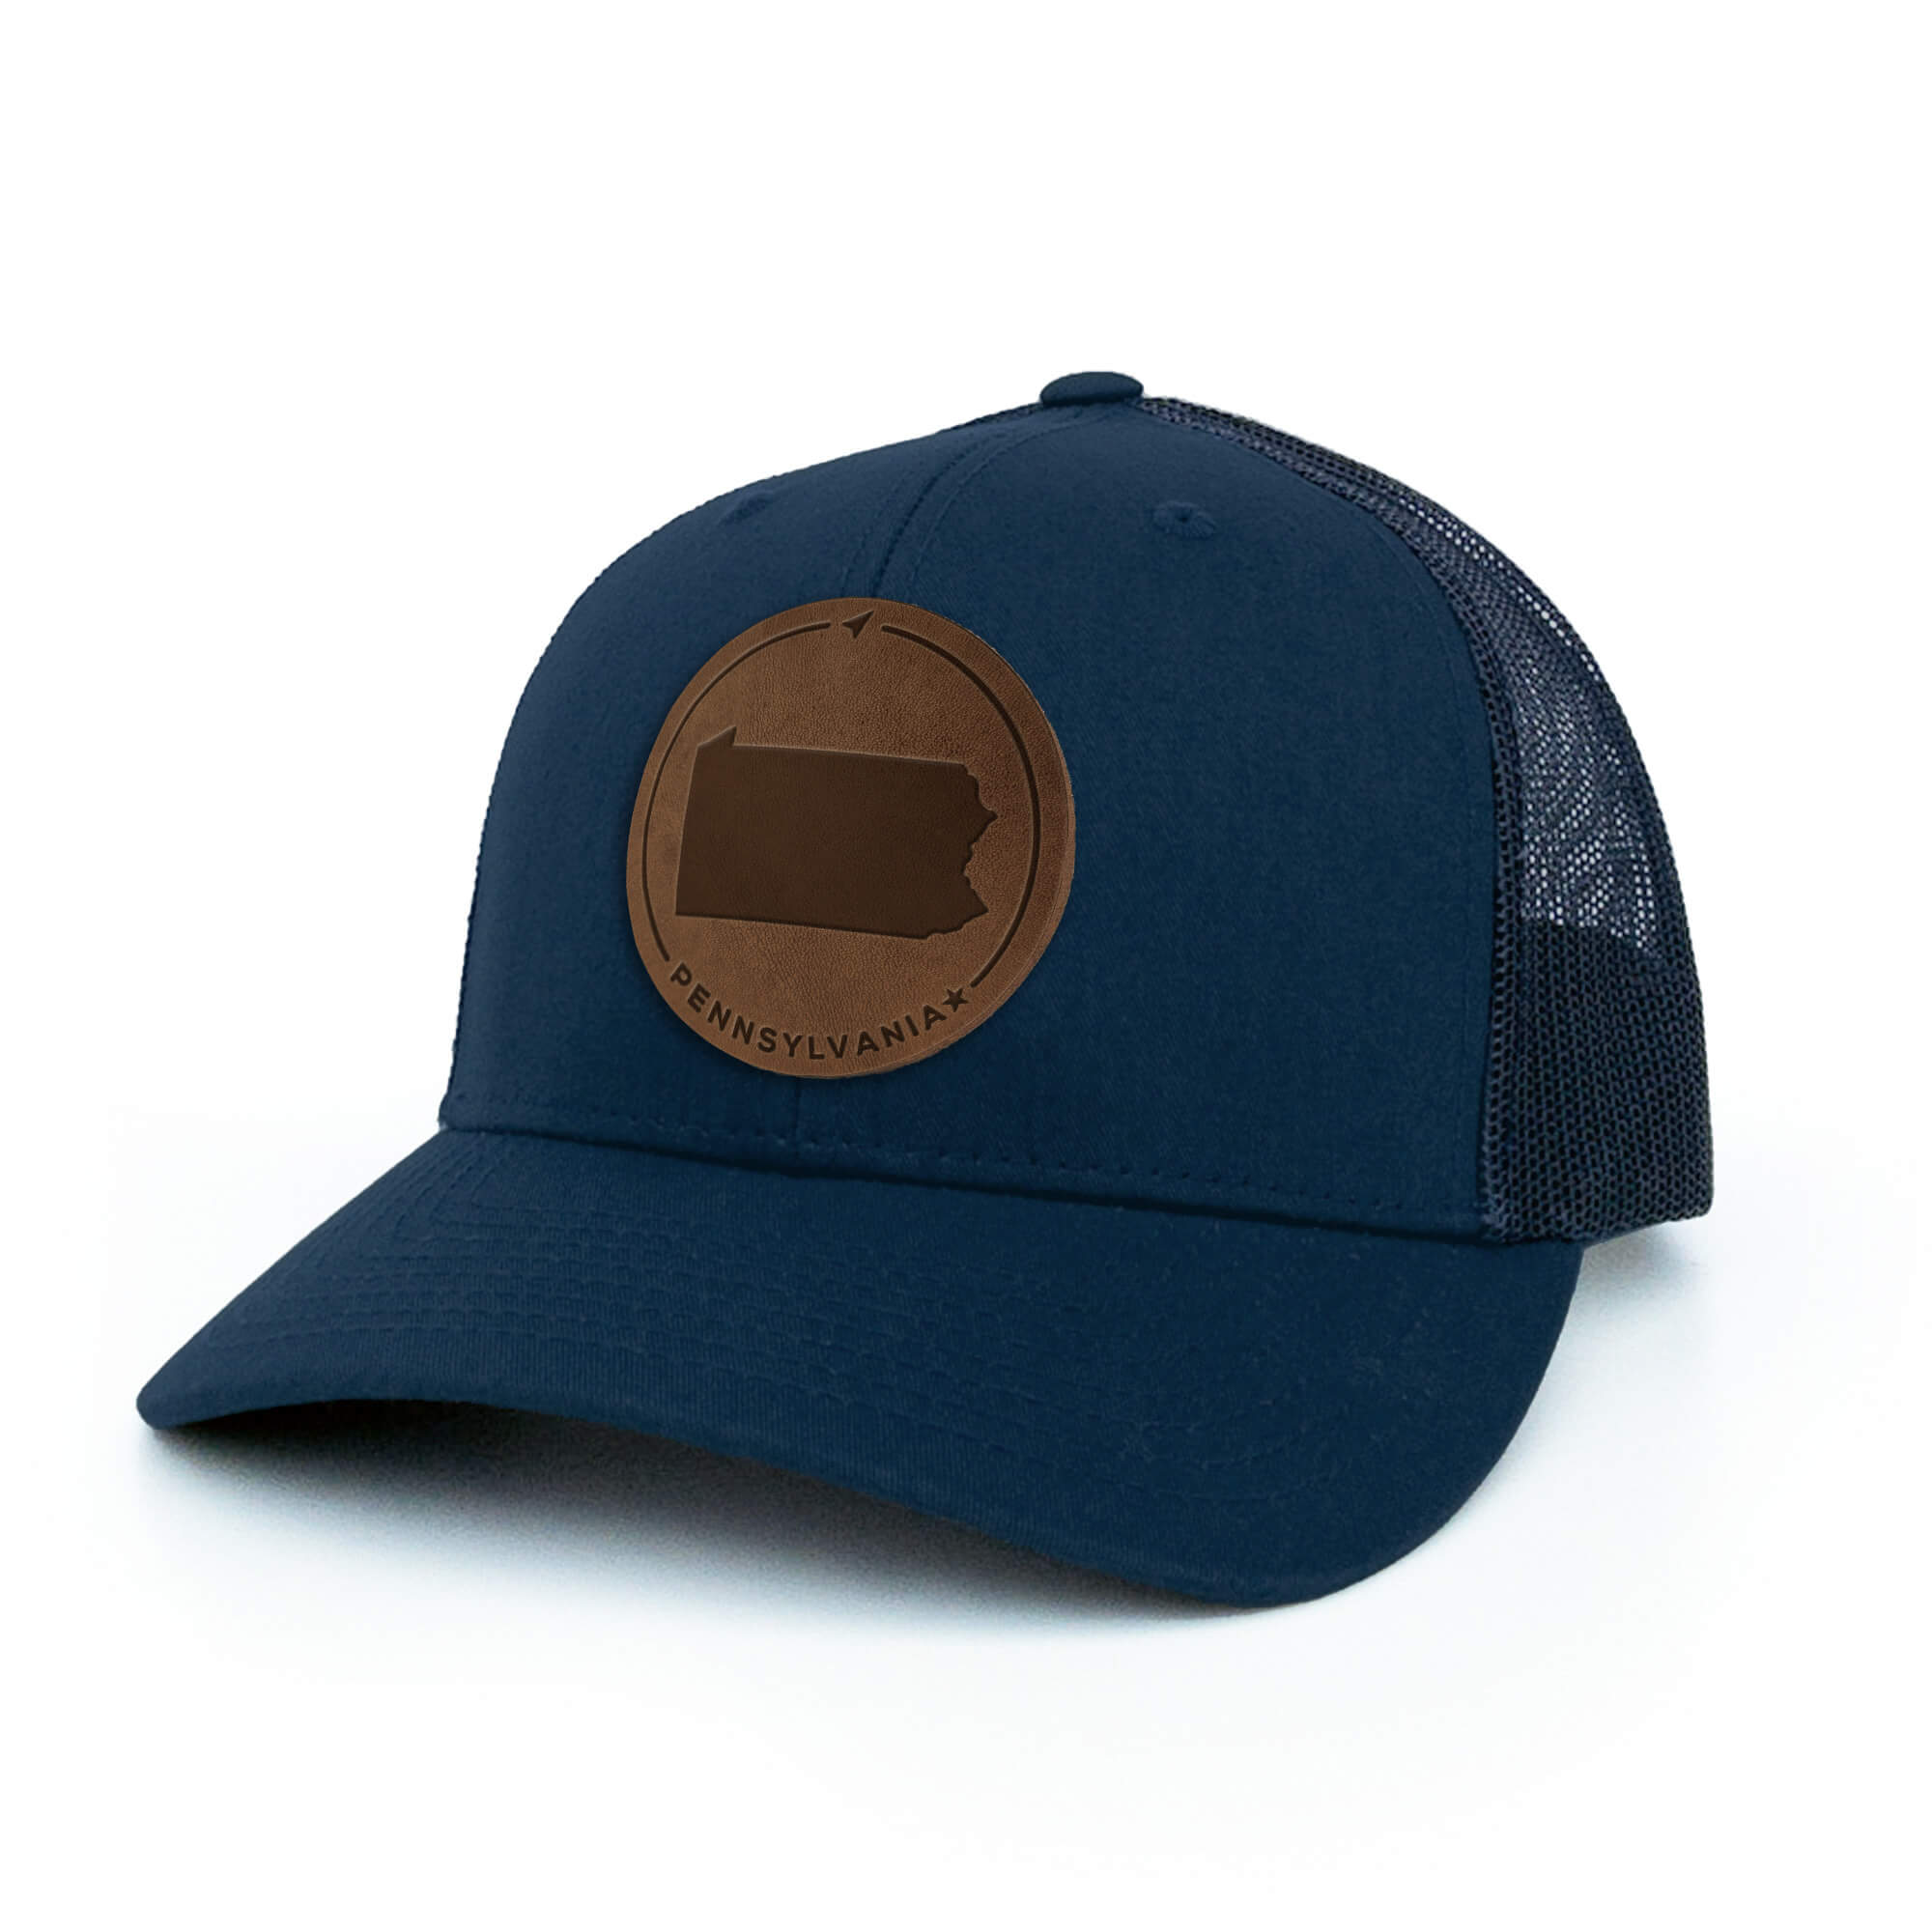 Navy trucker hat with full-grain leather patch of Pennsylvania | BLACK-003-003, CHARC-003-003, NAVY-003-003, HGREY-003-003, MOSS-003-003, BROWN-003-003